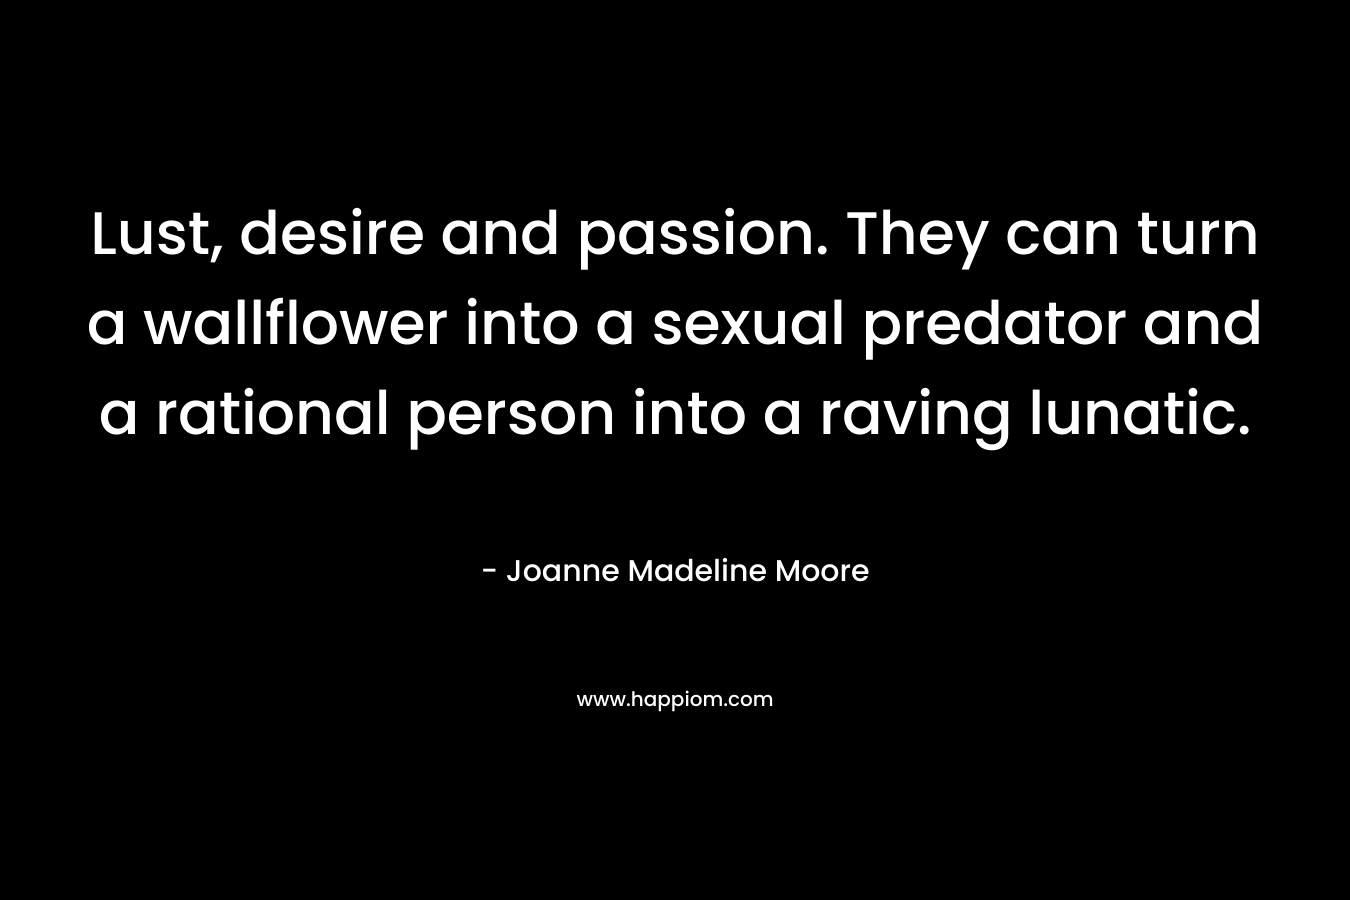 Lust, desire and passion. They can turn a wallflower into a sexual predator and a rational person into a raving lunatic.